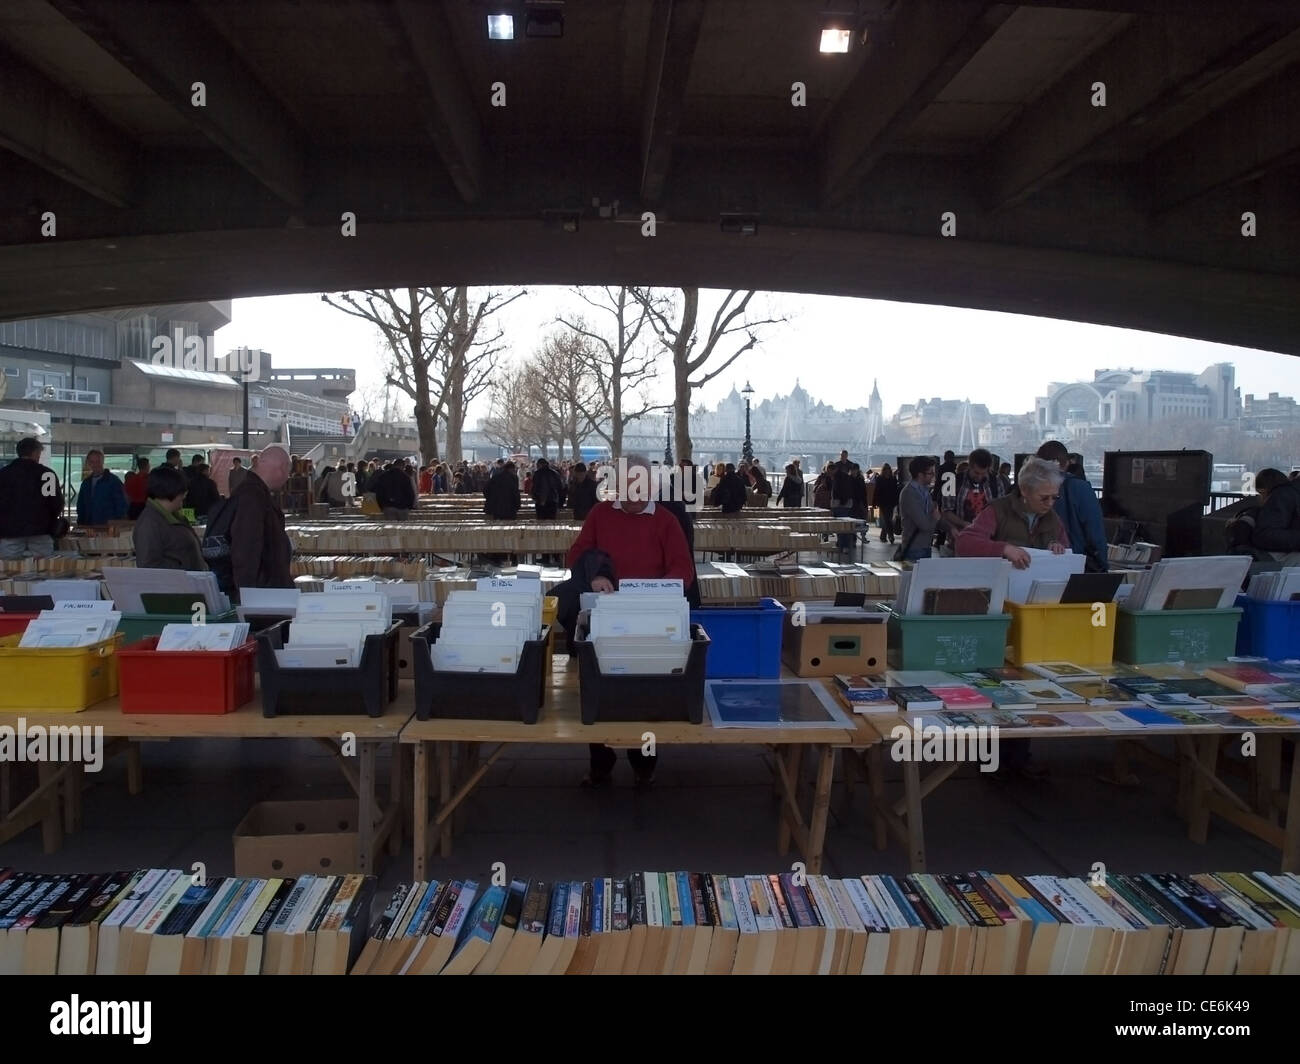 People browse the second hand books at the Waterloo Bridge Book Market Stock Photo